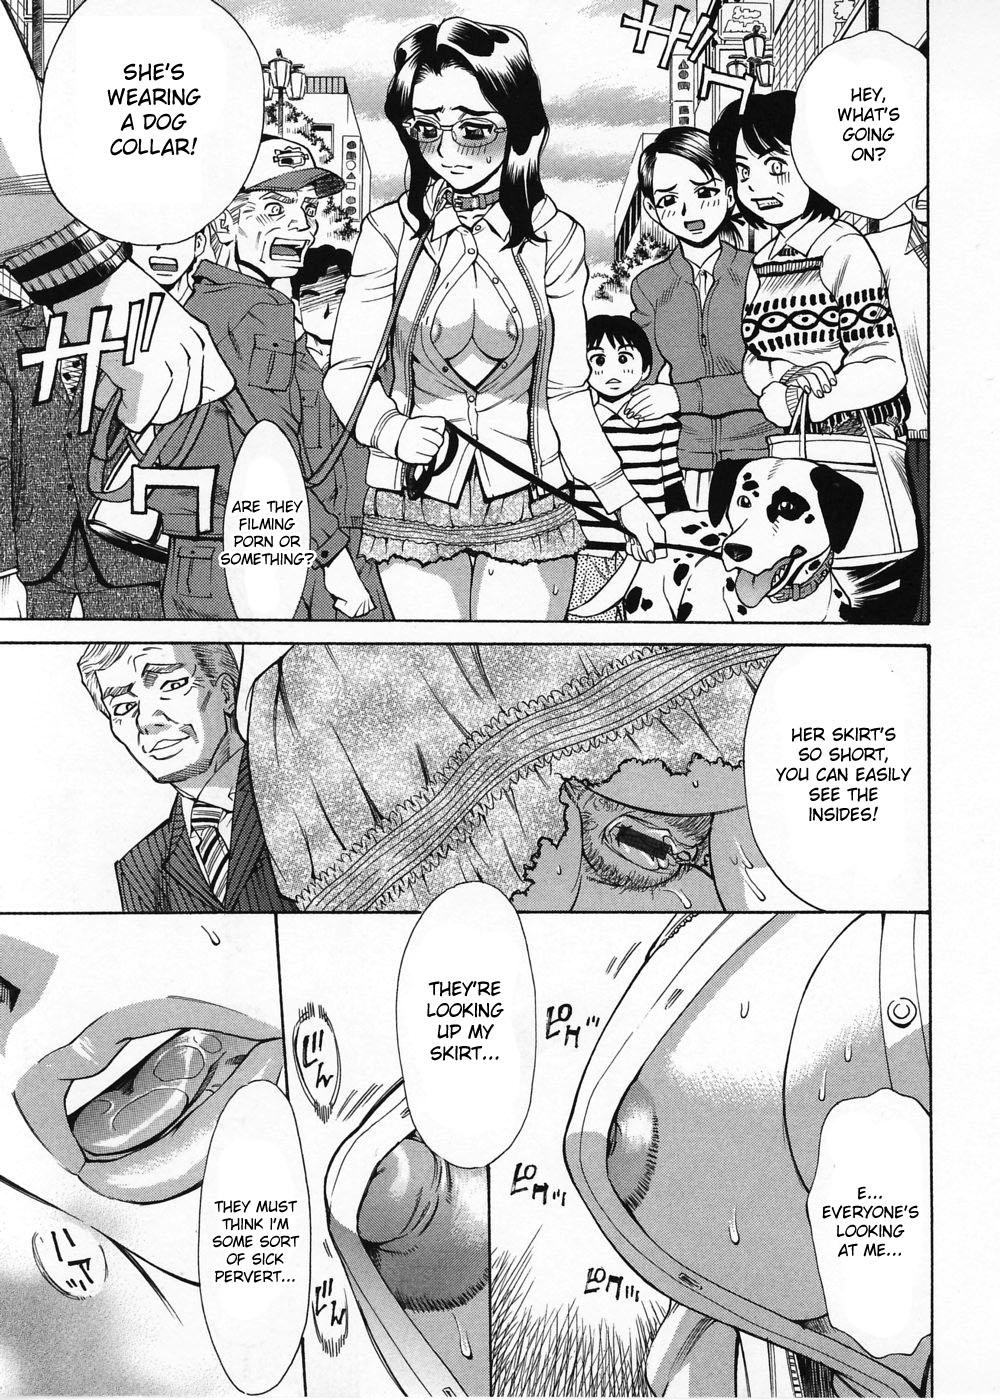 Boys Brand Of Obscene Ch.1-3 Couple - Page 5